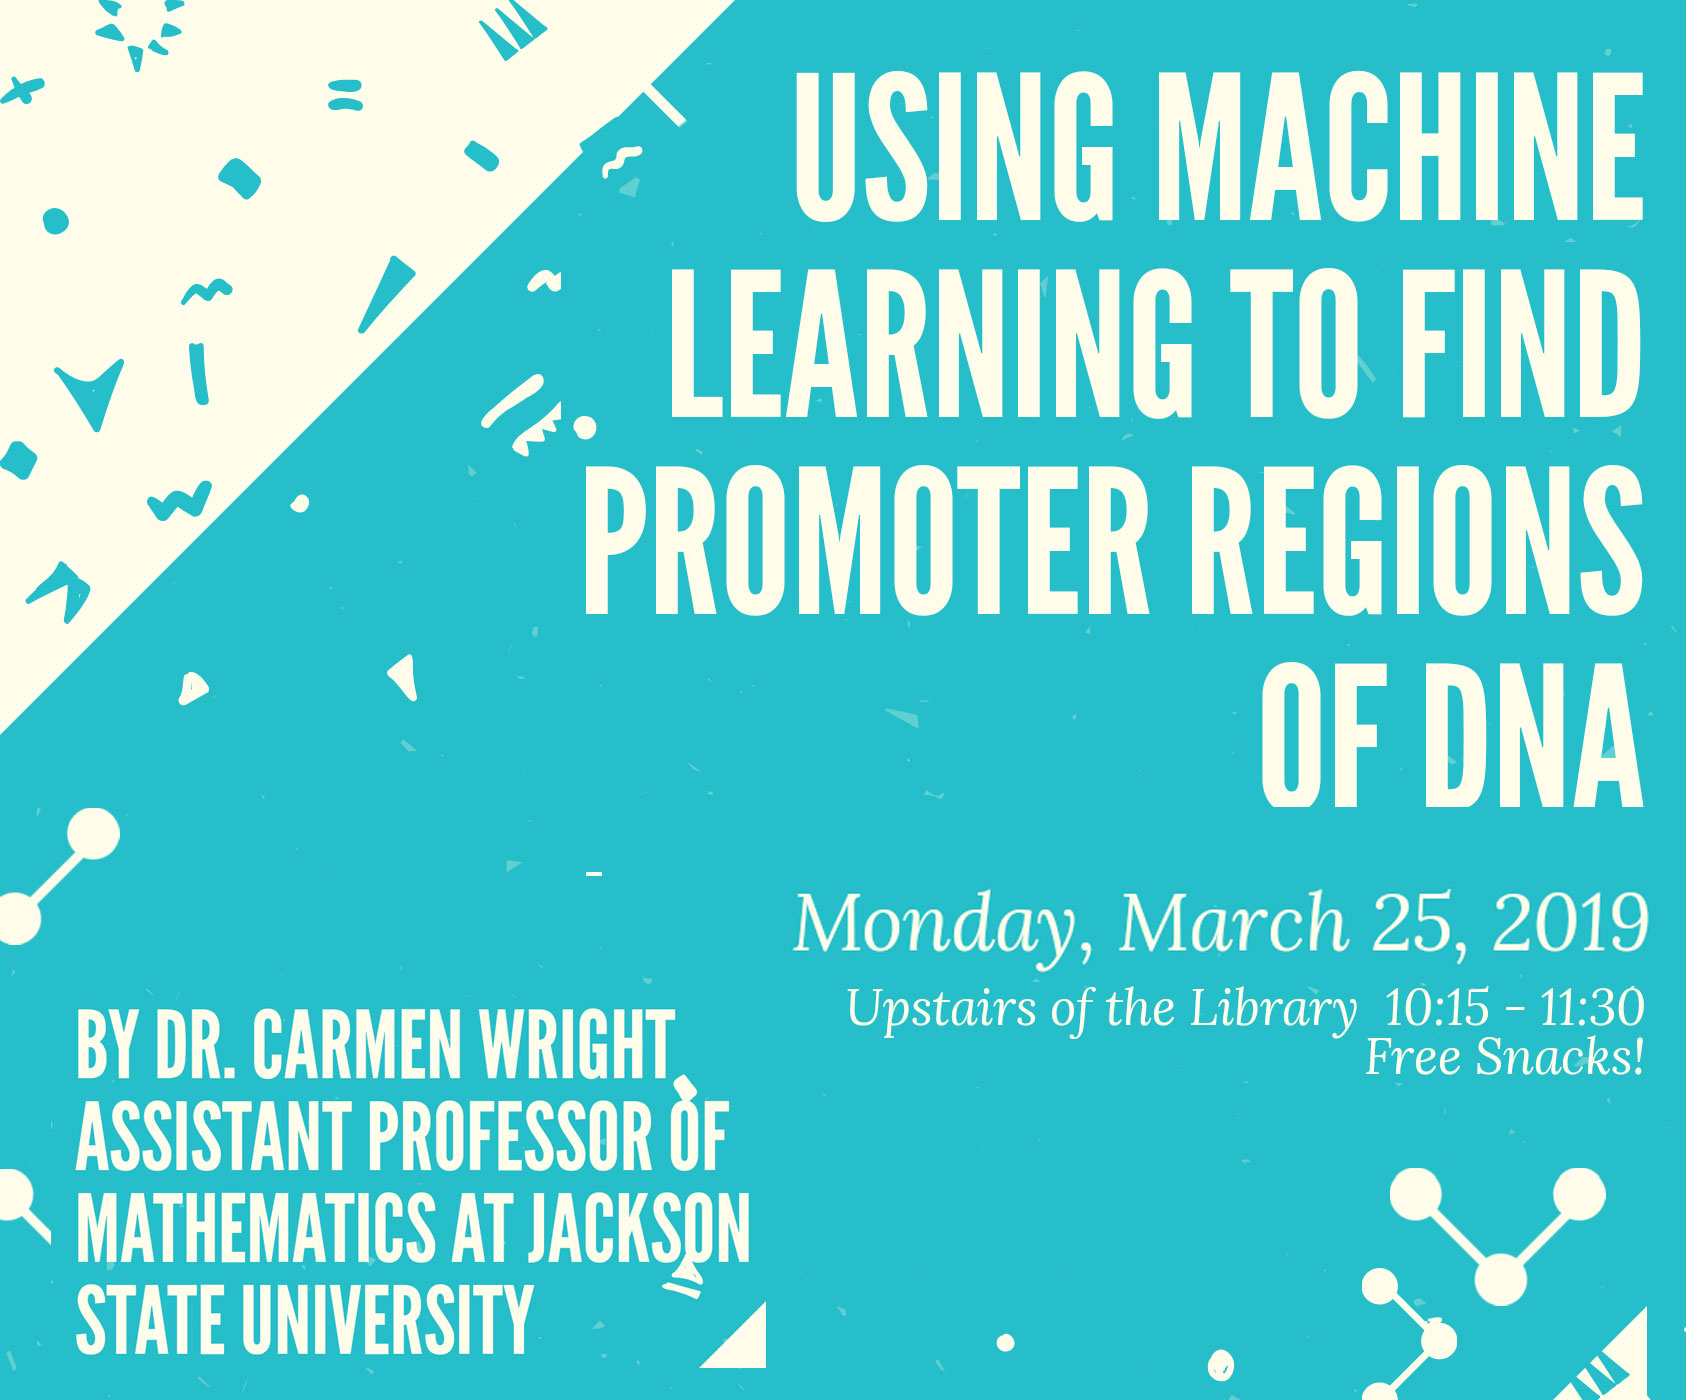 Flier for talk with title Using machine learning to find Promoter regions on a blue and white background. Also includes information about time and date of the talk: March 25, 10:15 to 11:30 a.m. in library, sponsored by the UHWO SACNAS Chapter. Dr. Carmen Wright, assitant professor of Mathematics at Jackson State will be the speaker